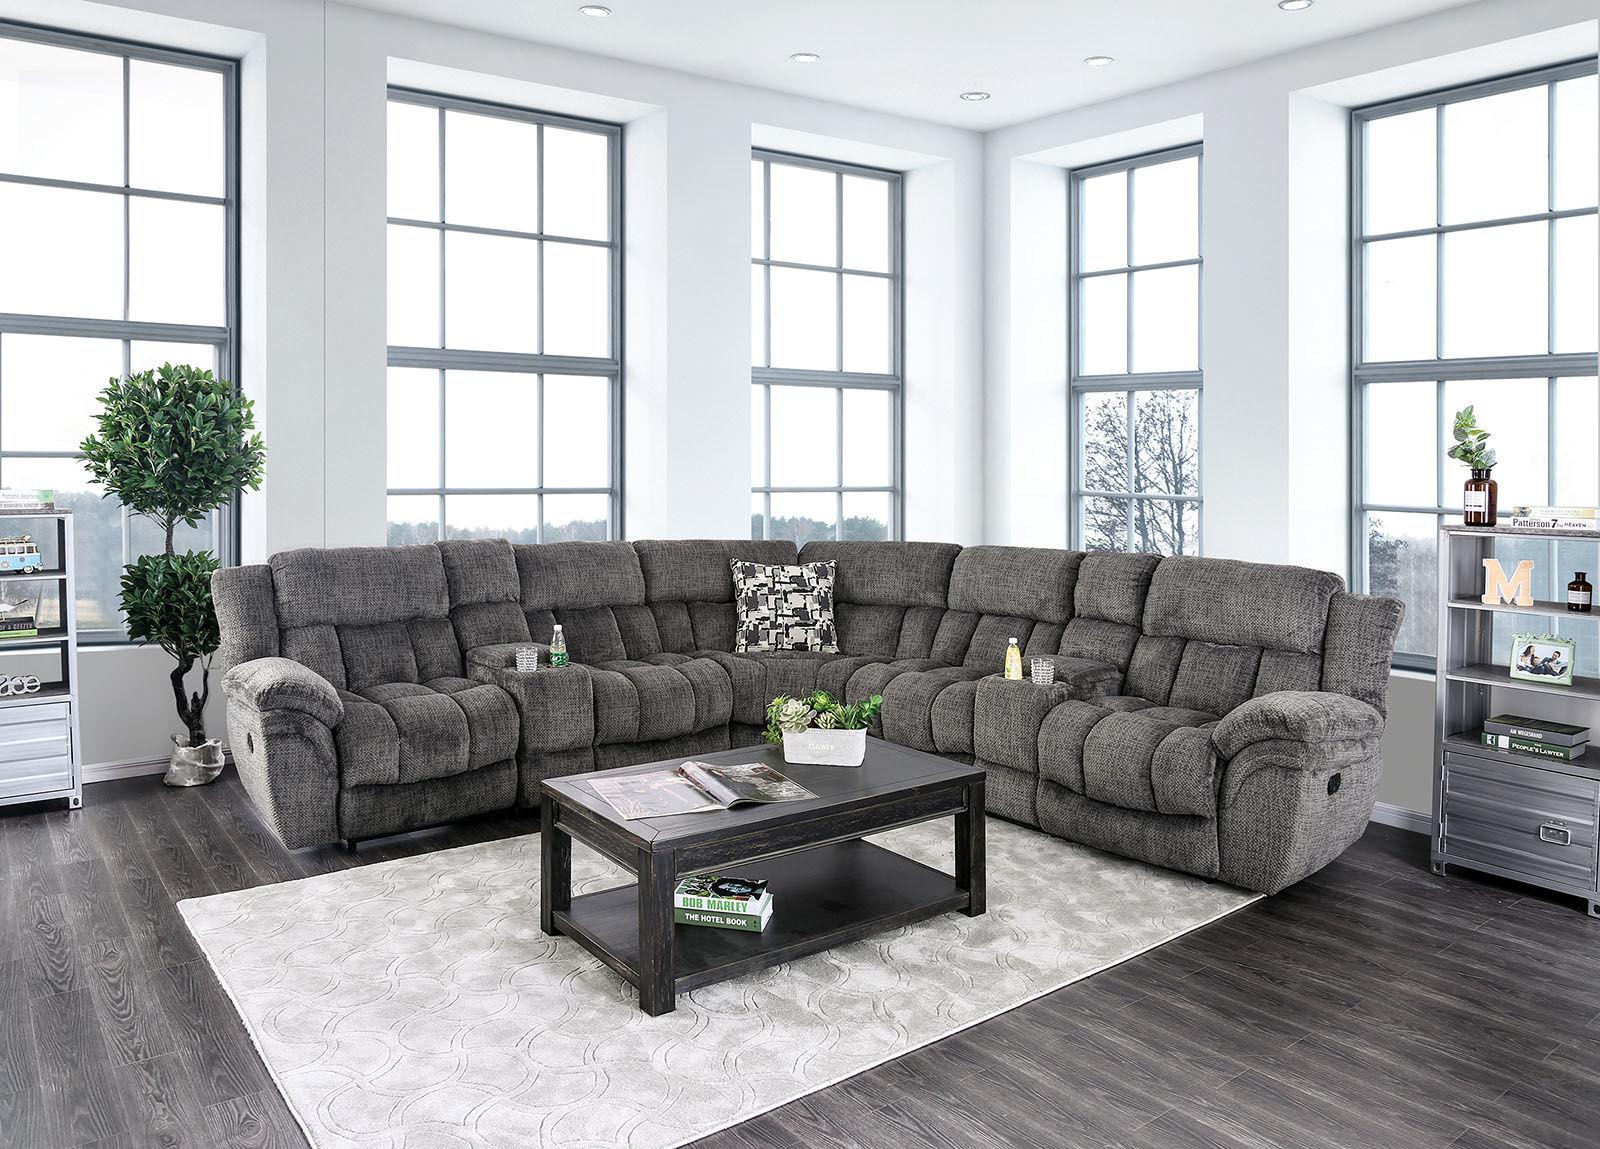 Transitional Recliner Sectional CM6585GY Irene CM6585GY in Gray 